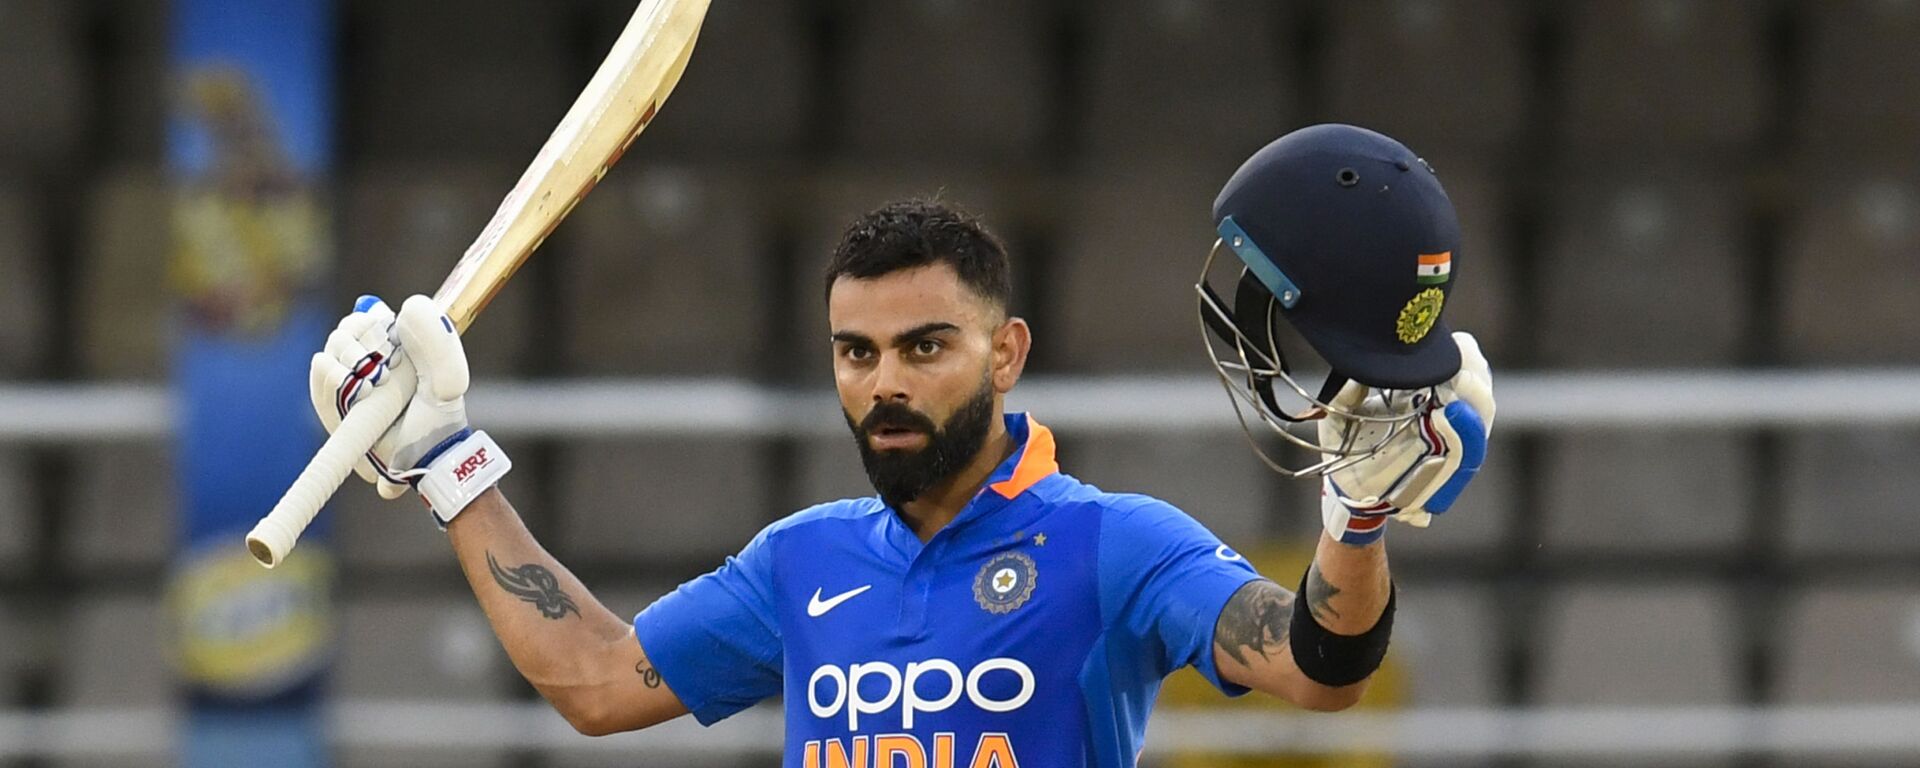 Virat Kohli of India celebrates his century during the 3rd ODI match between West Indies and India at Queens Park Oval, Port of Spain, Trinidad and Tobago, on August 14, 2019 - Sputnik International, 1920, 16.07.2021